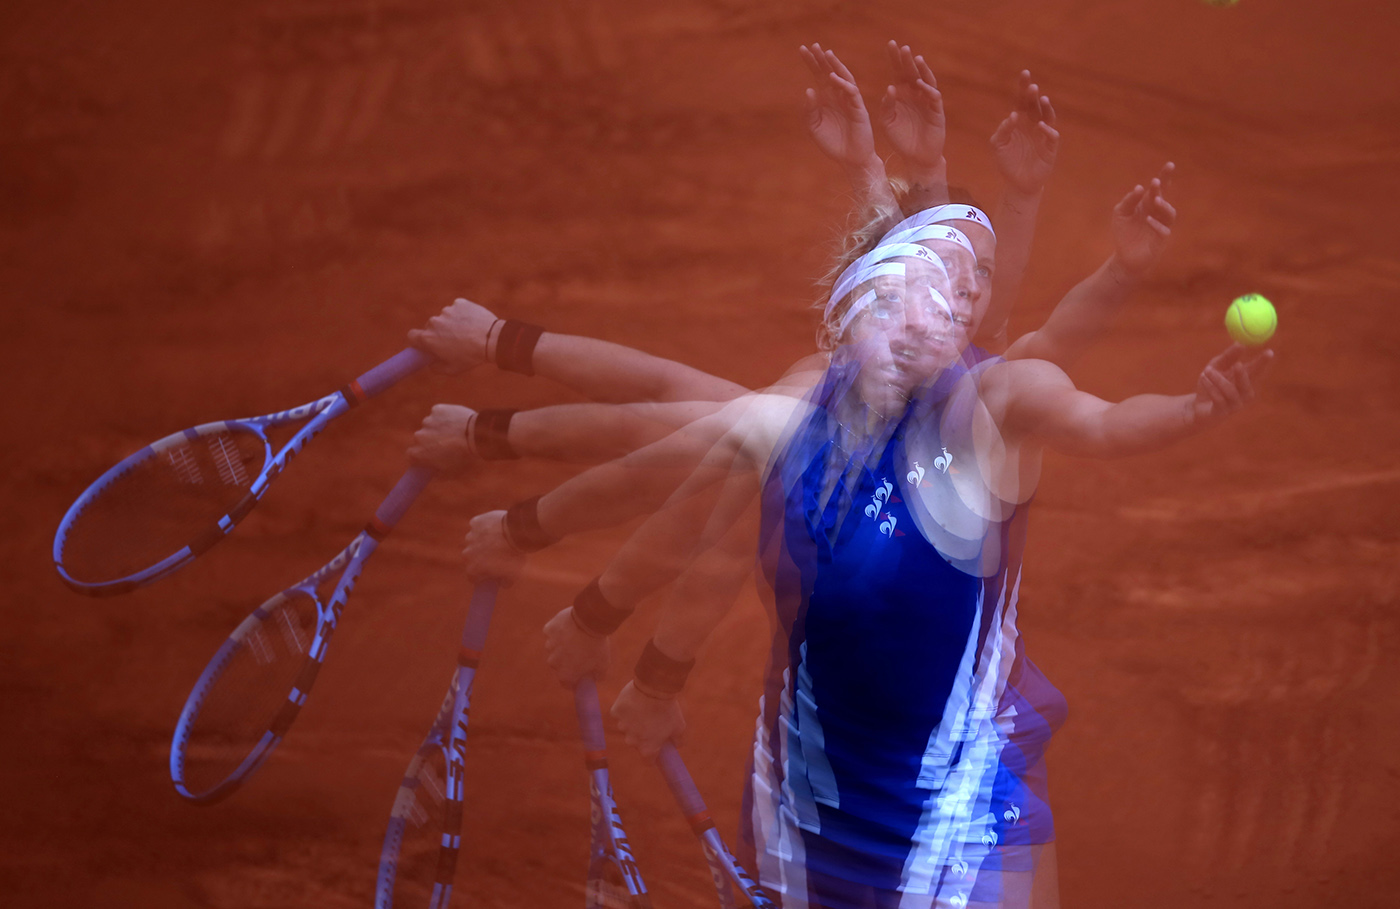 A multiple exposure image of Pauline Parmentier of France in action during her semi final match against Irina Begu of Romania at the TEB BNP Paribas Istanbul Cup tennis tournament in Istanbul, Turkey, 28 April 2018.